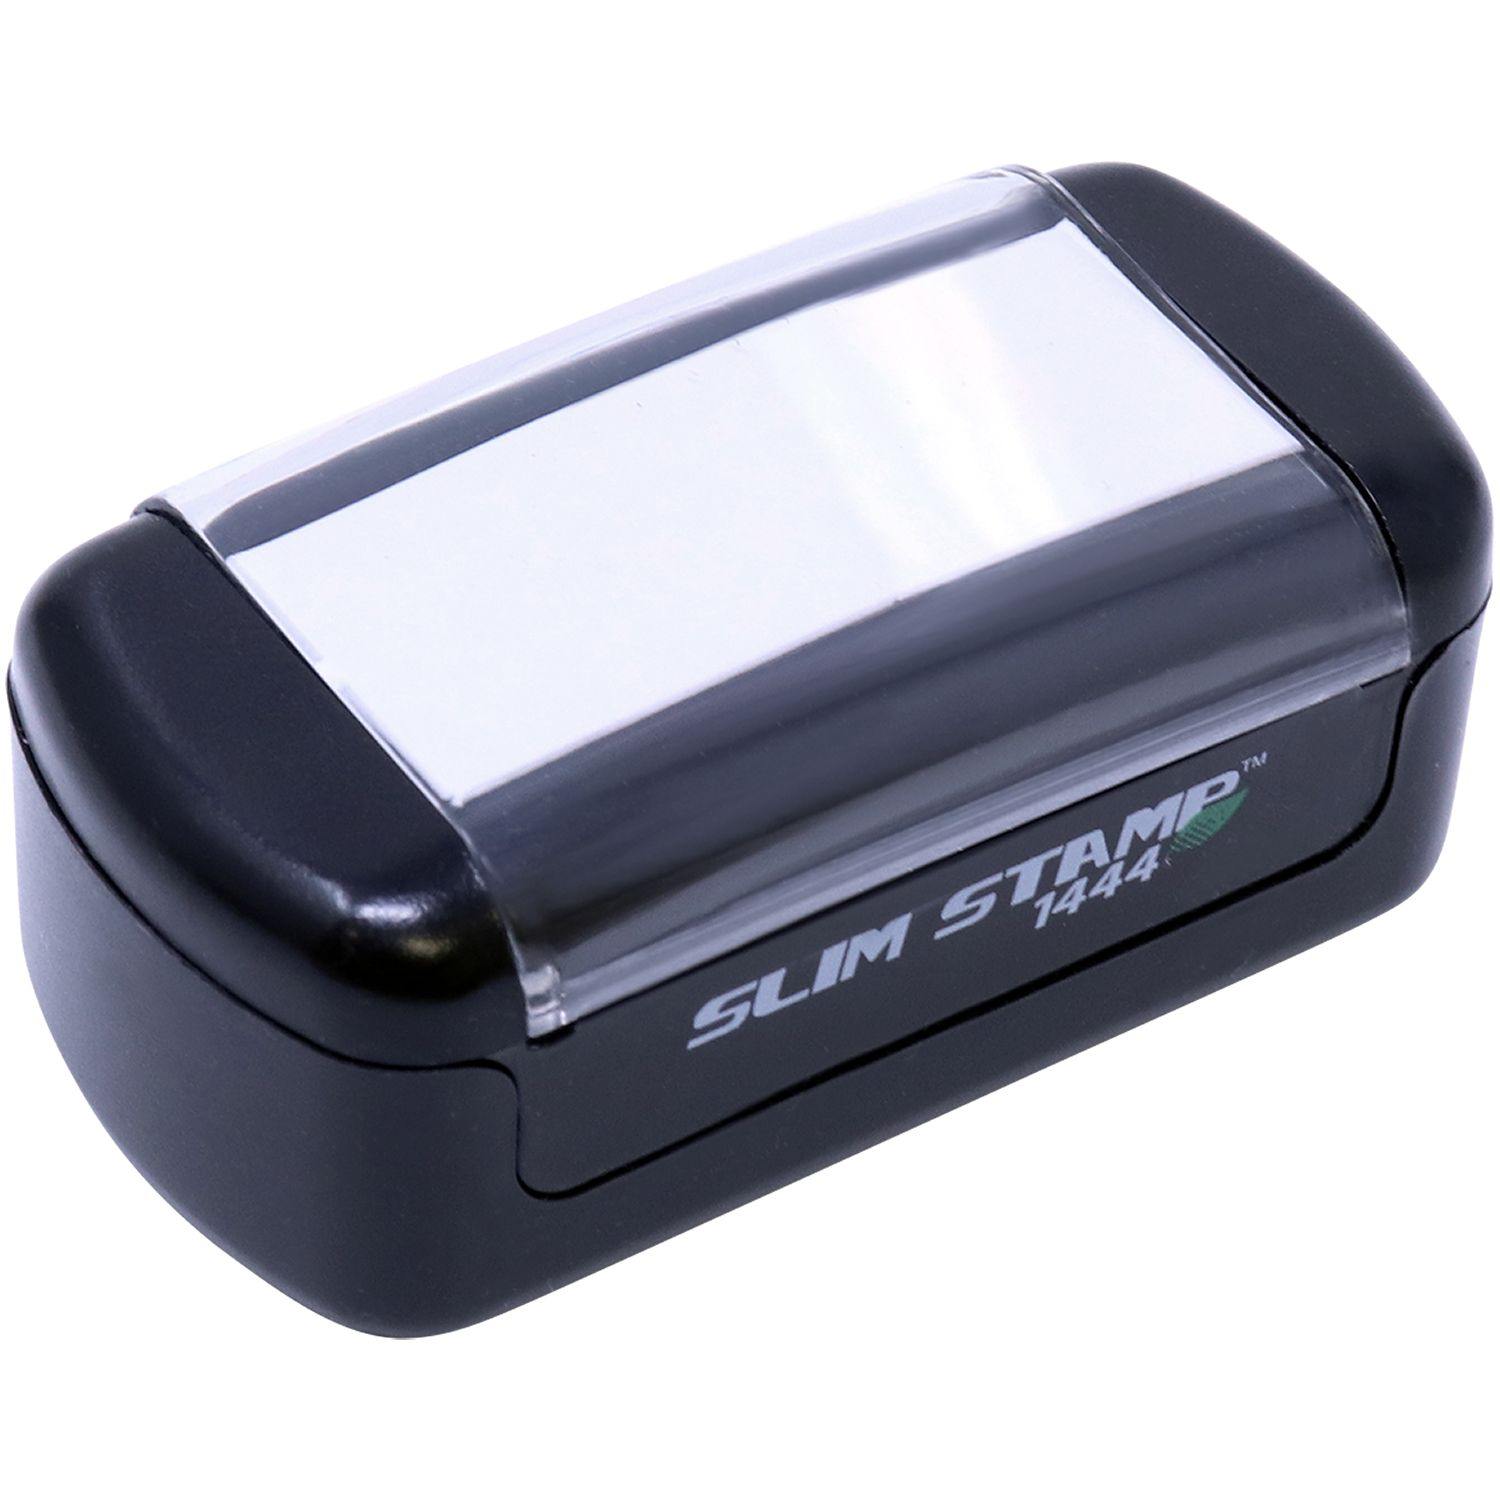 Slim Pre-Inked Bold Admitted Stamp - Engineer Seal Stamps - Brand_Slim, Impression Size_Small, Stamp Type_Pre-Inked Stamp, Type of Use_Medical Office